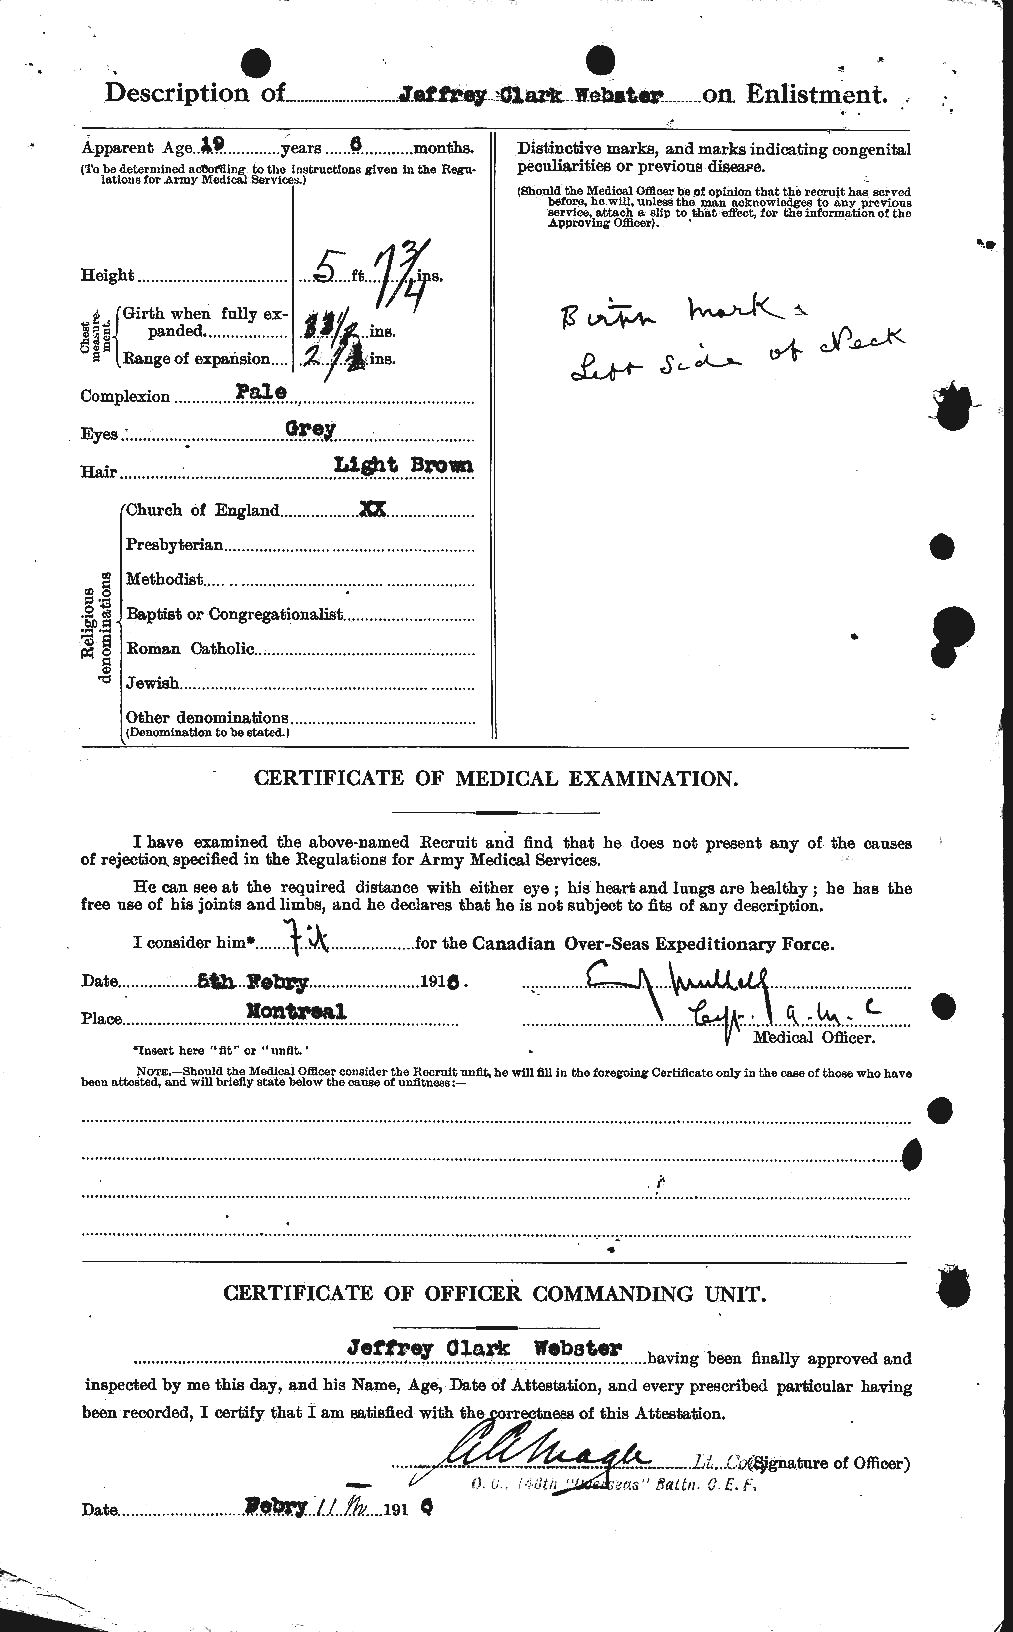 Personnel Records of the First World War - CEF 670466b